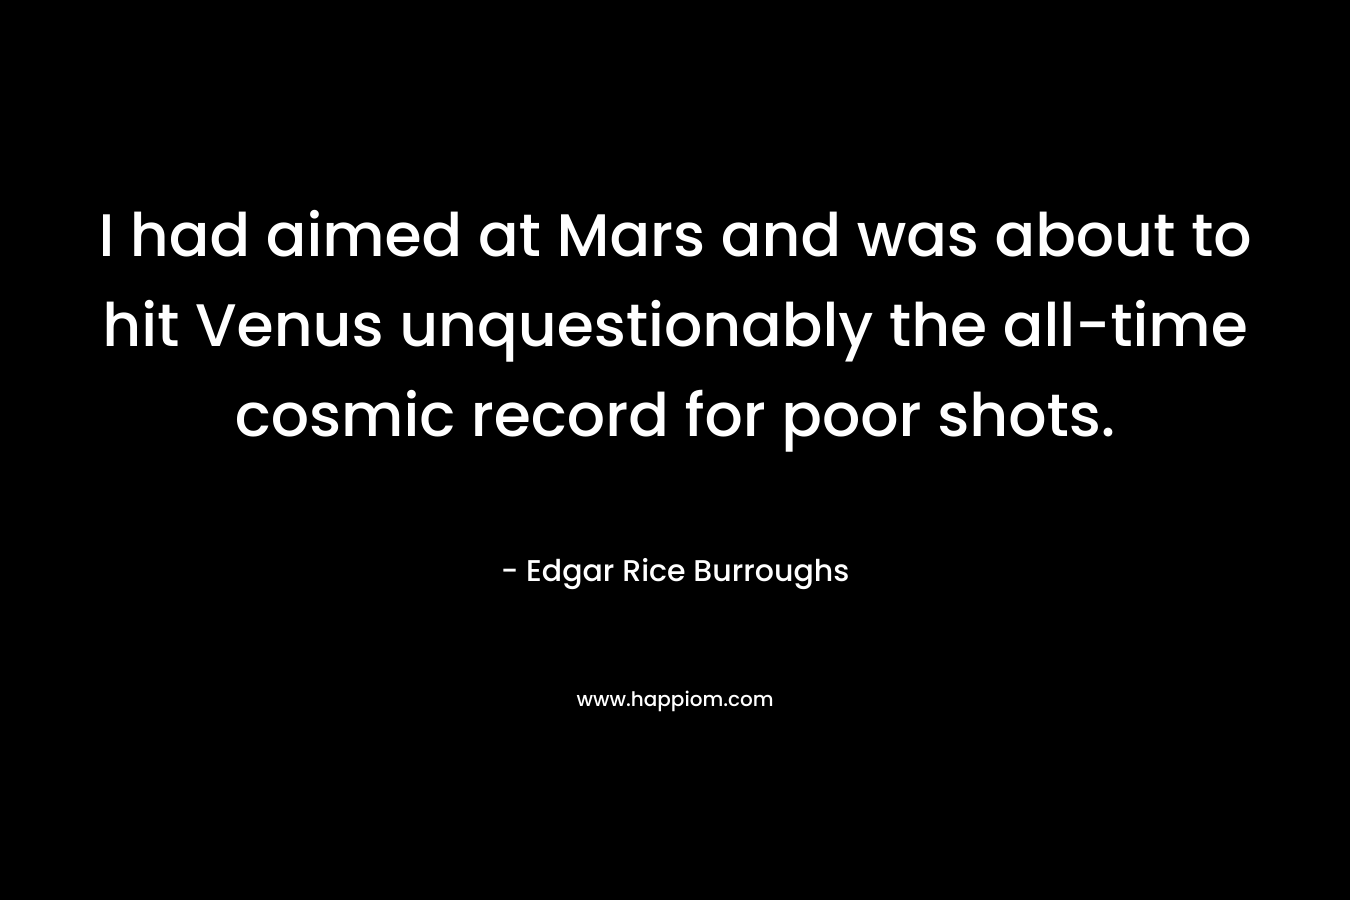 I had aimed at Mars and was about to hit Venus unquestionably the all-time cosmic record for poor shots. 